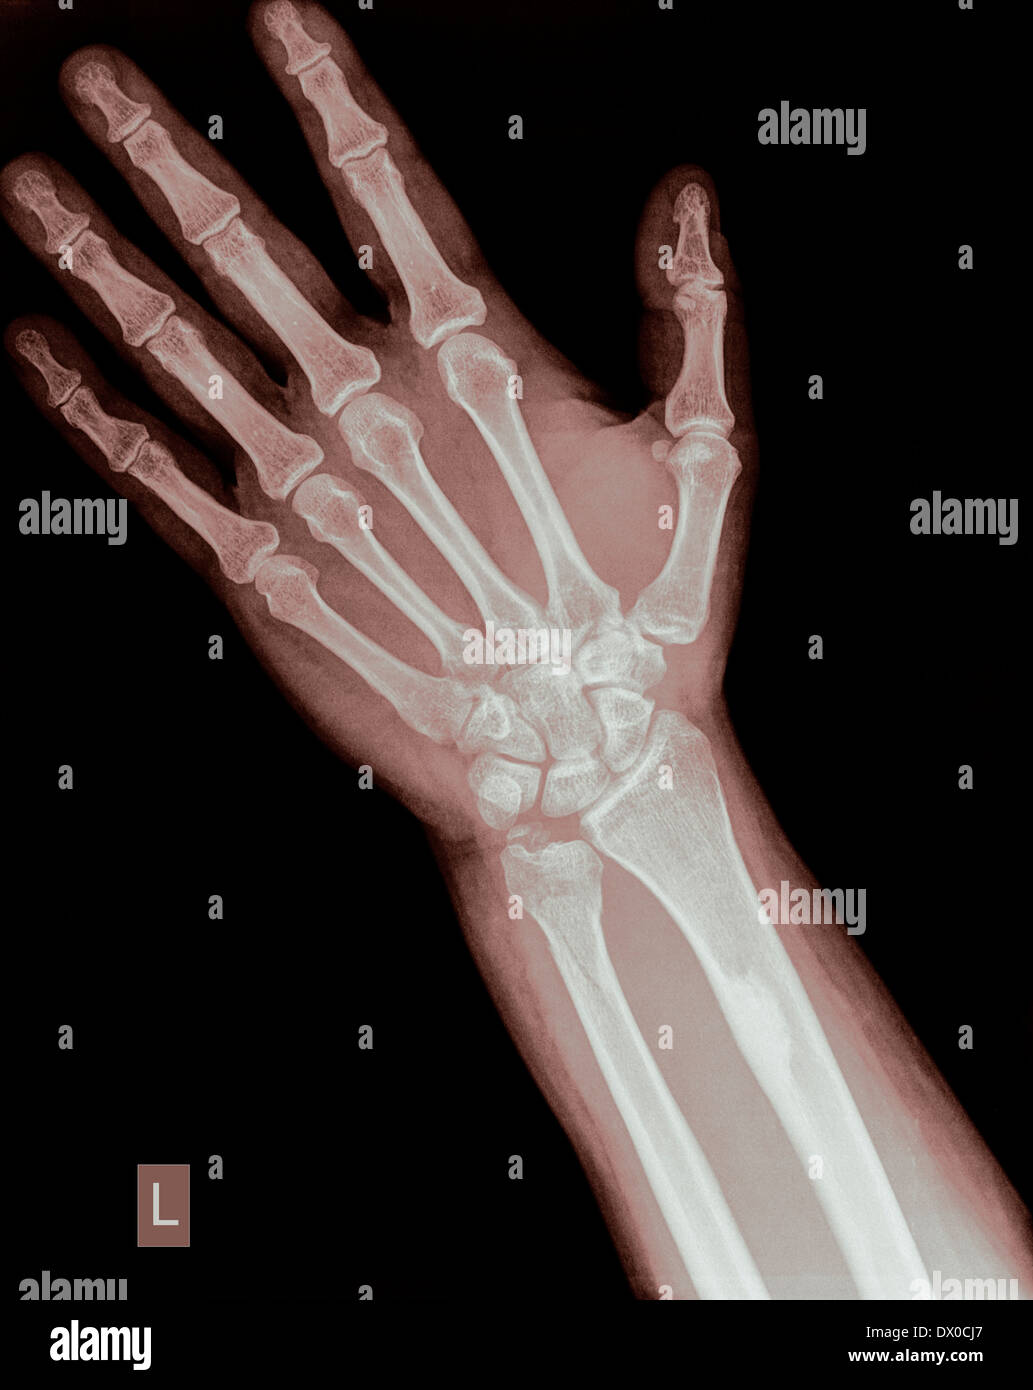 Clinical photograph of the right wrist of a 35-yearold male